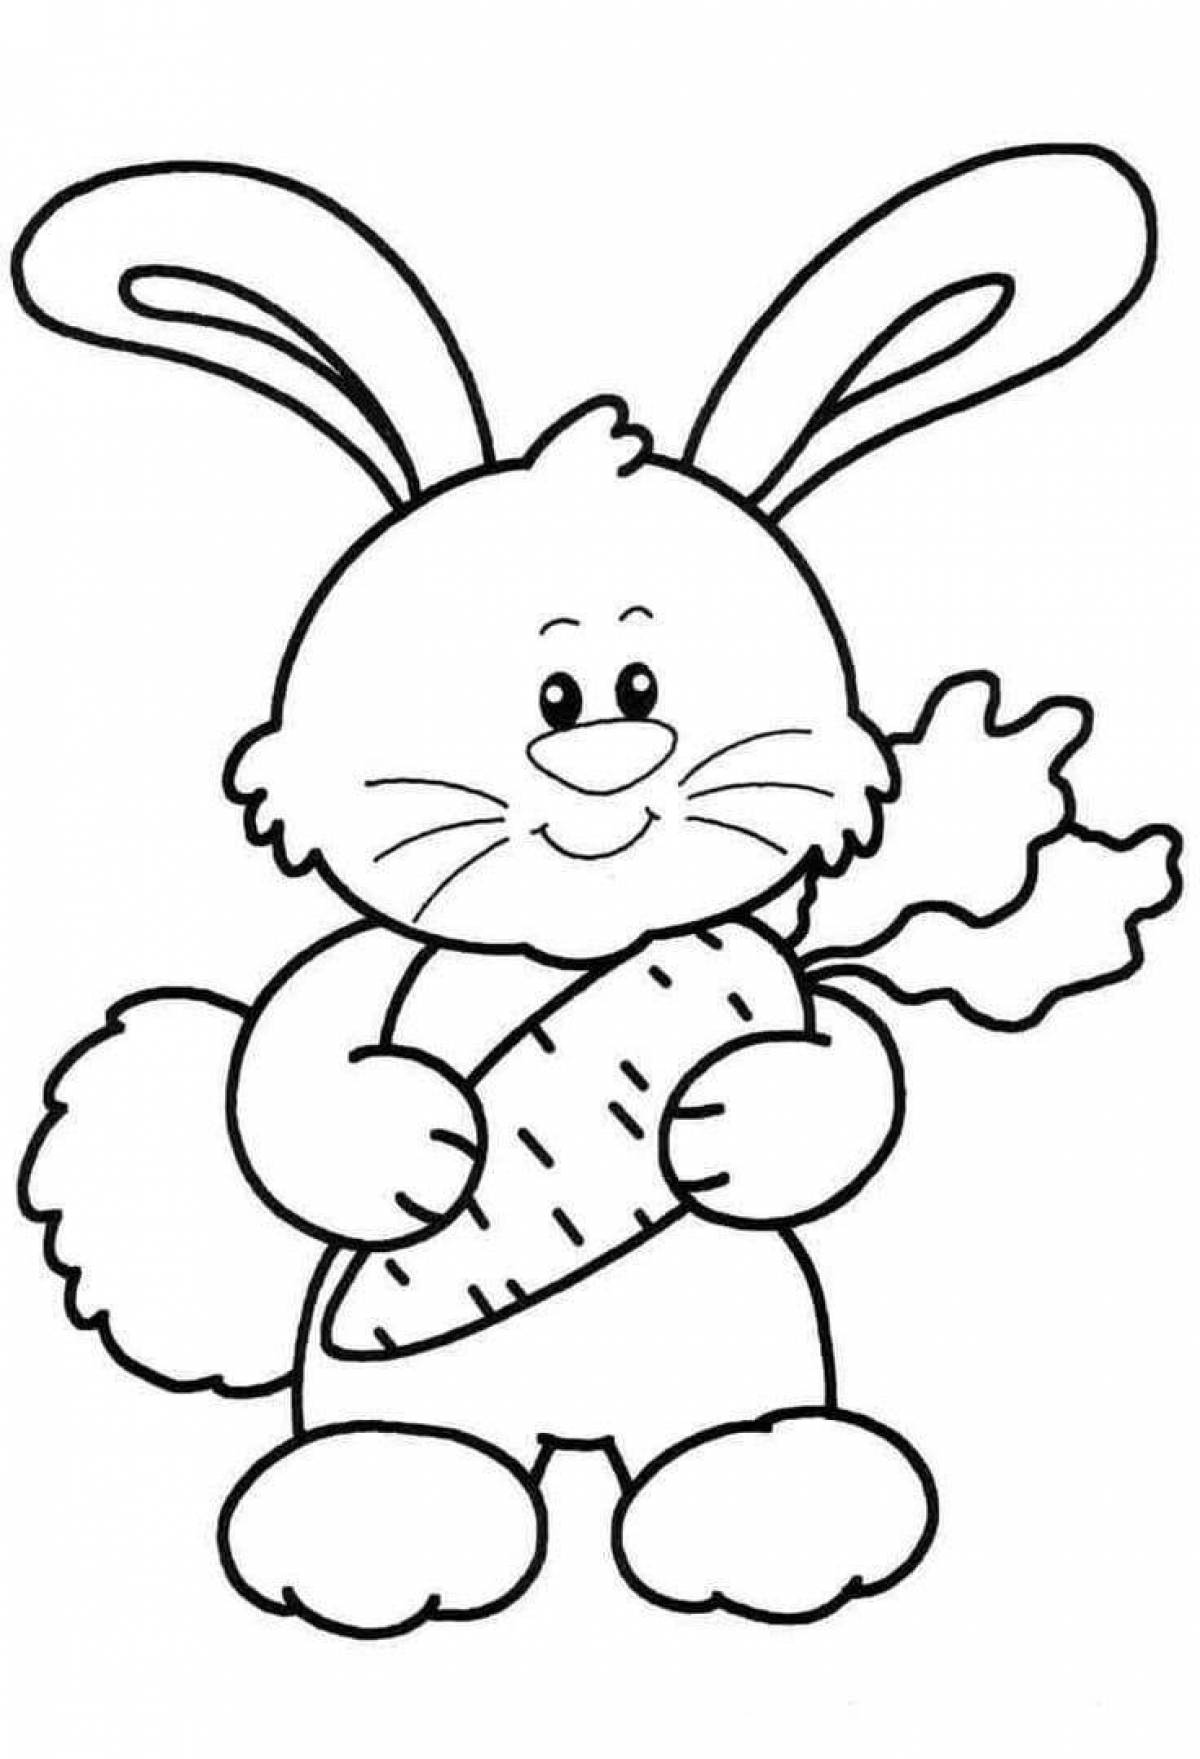 Cozy rabbit coloring book for kids 2-3 years old